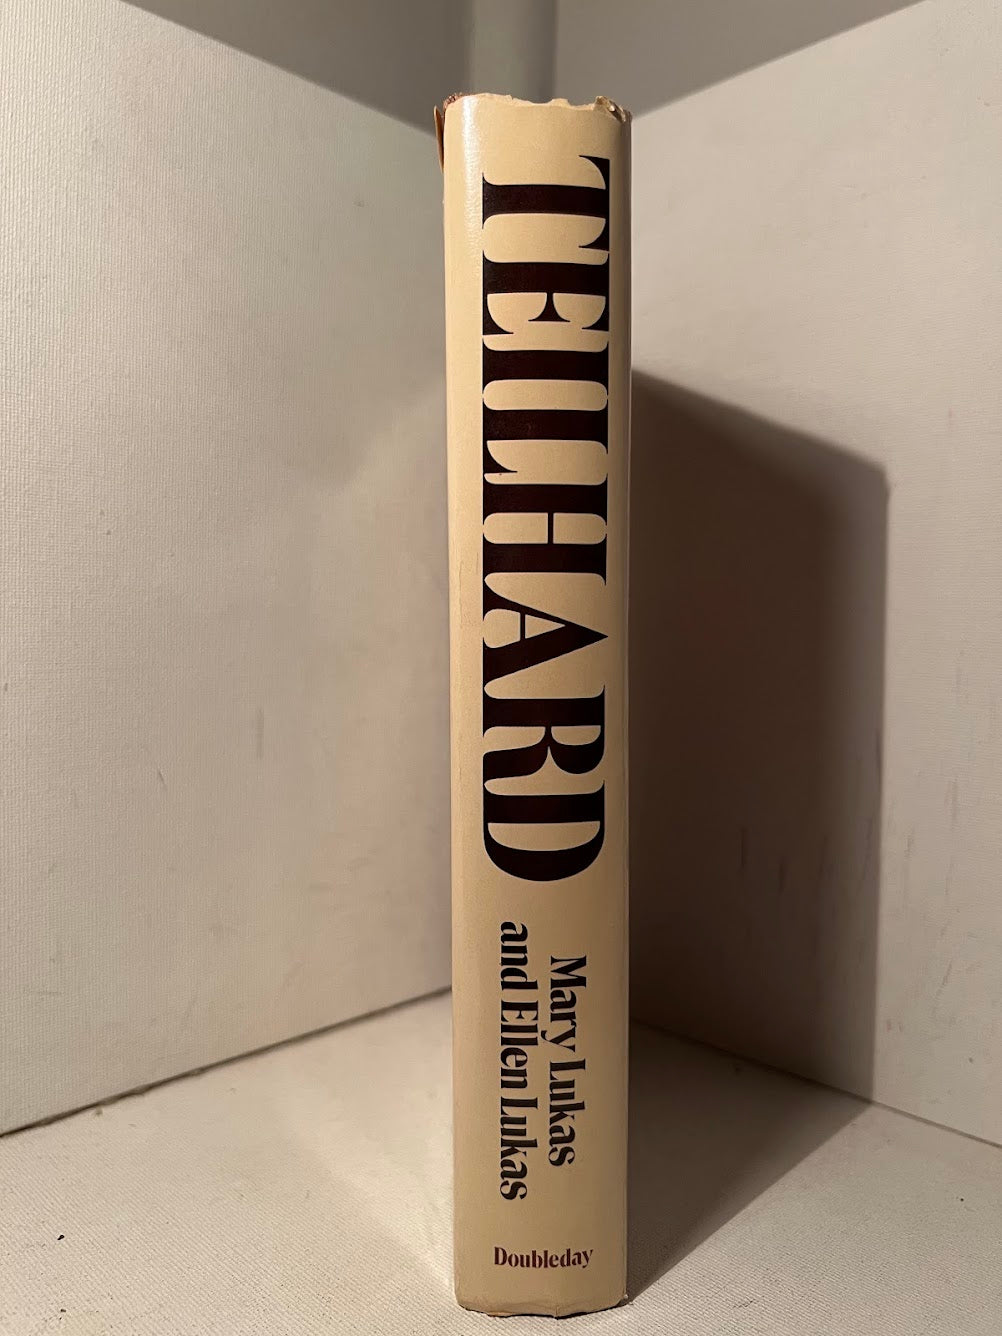 Teilhard The Man, The Priest, The Scientist by Mary Lukas and Ellen Lukas